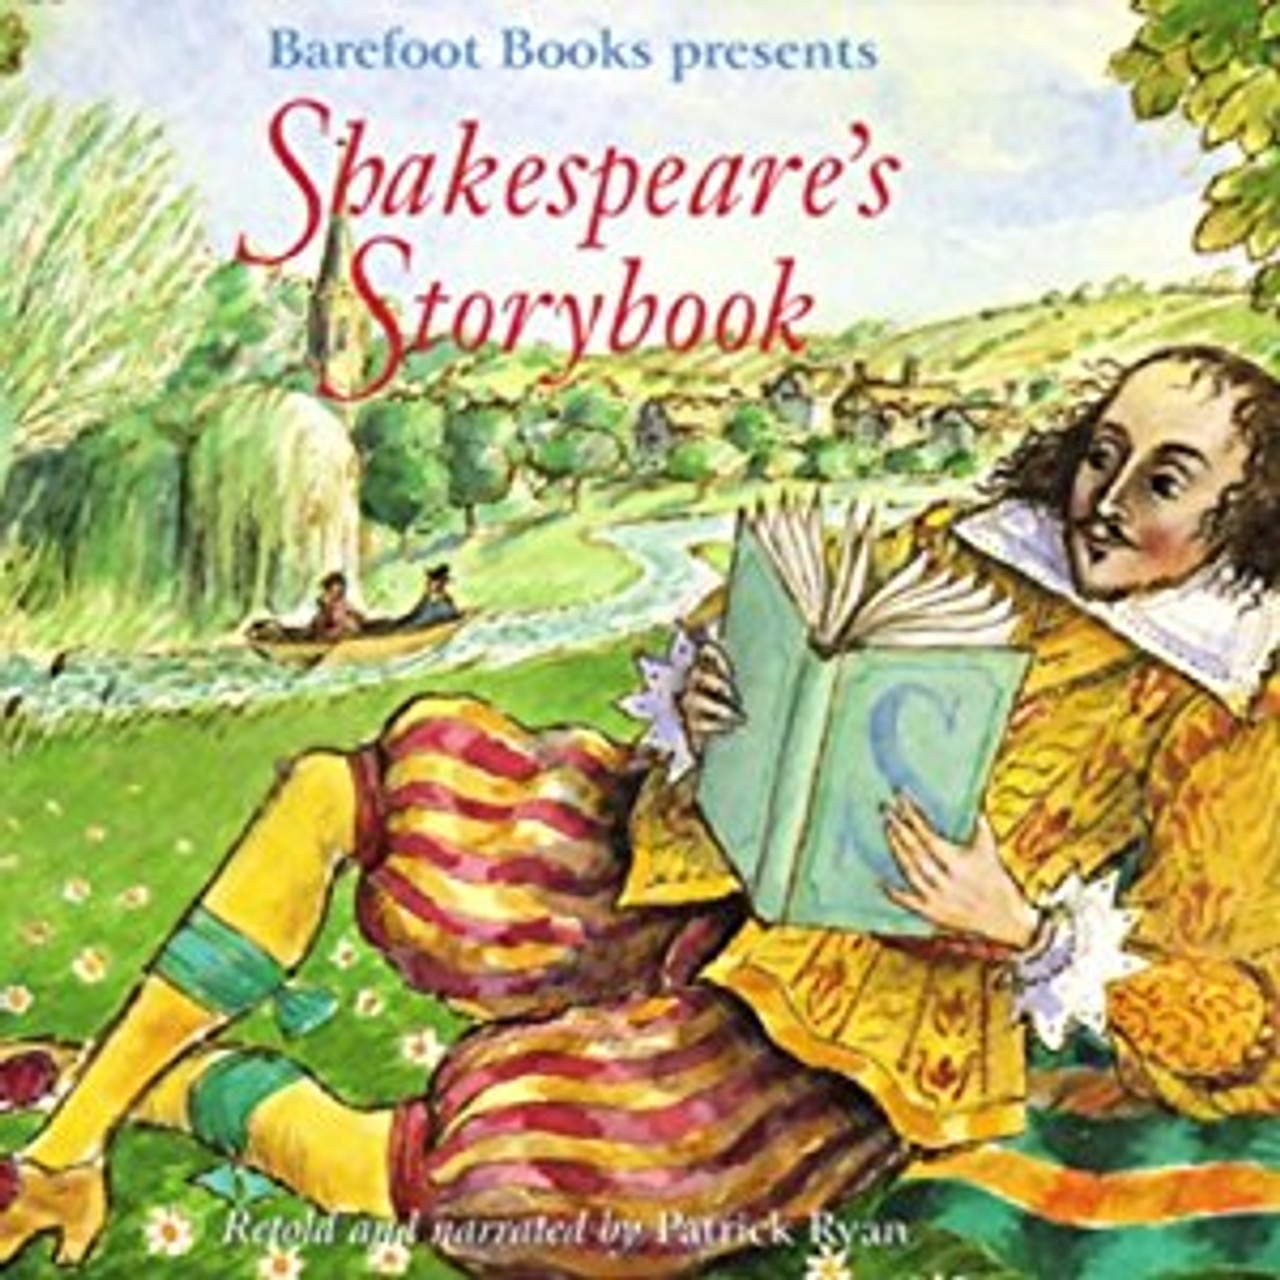 Shakespeare's Storybook: Folk Tales That Inspired the Bard by Patrick Ryan